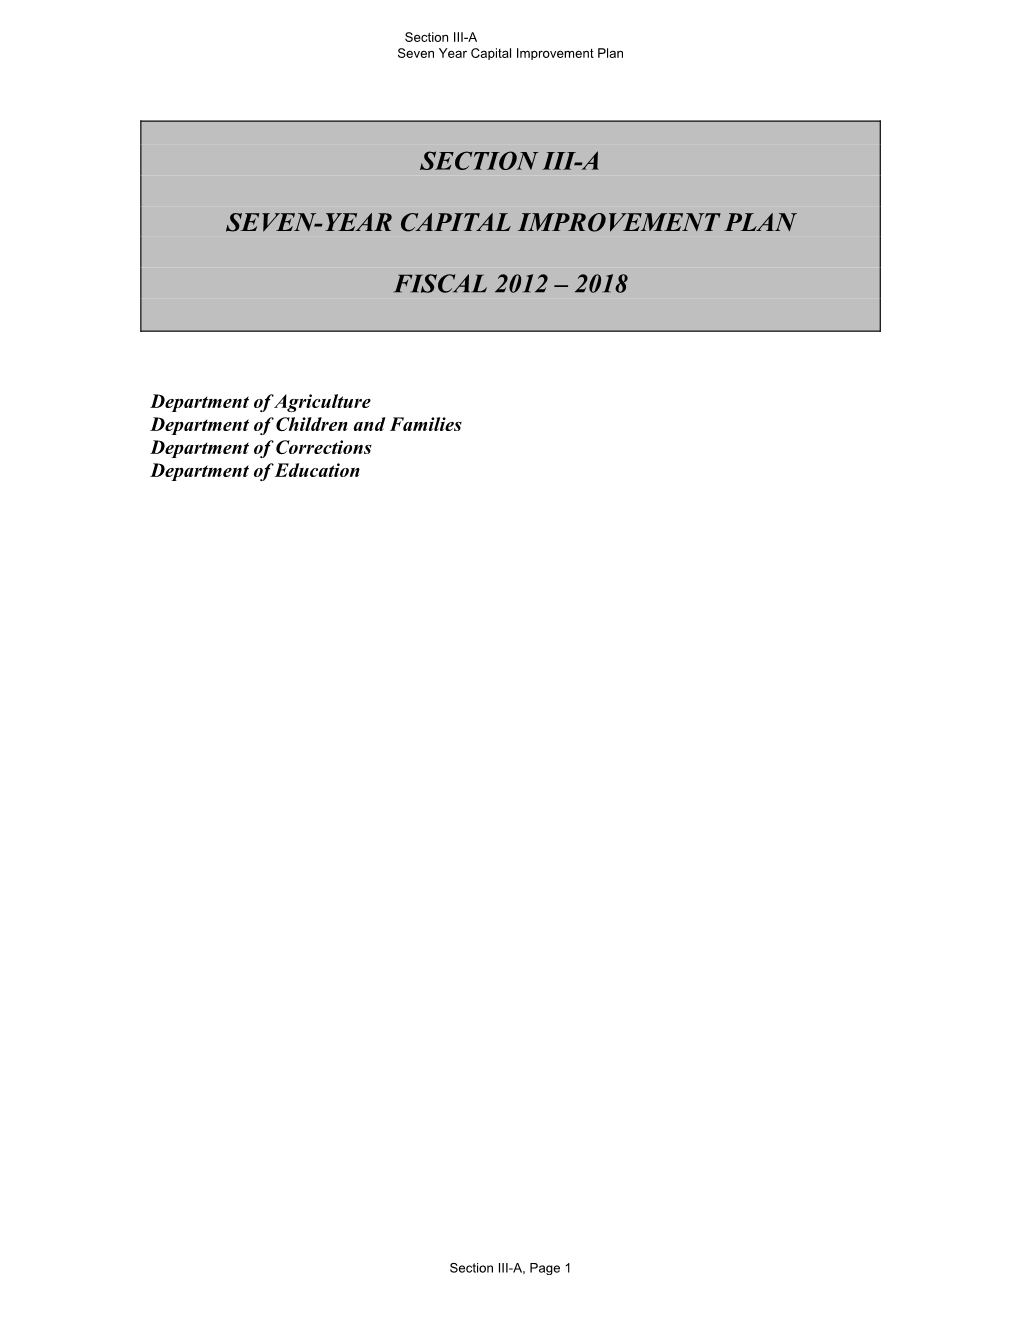 Section Iii-A Seven-Year Capital Improvement Plan